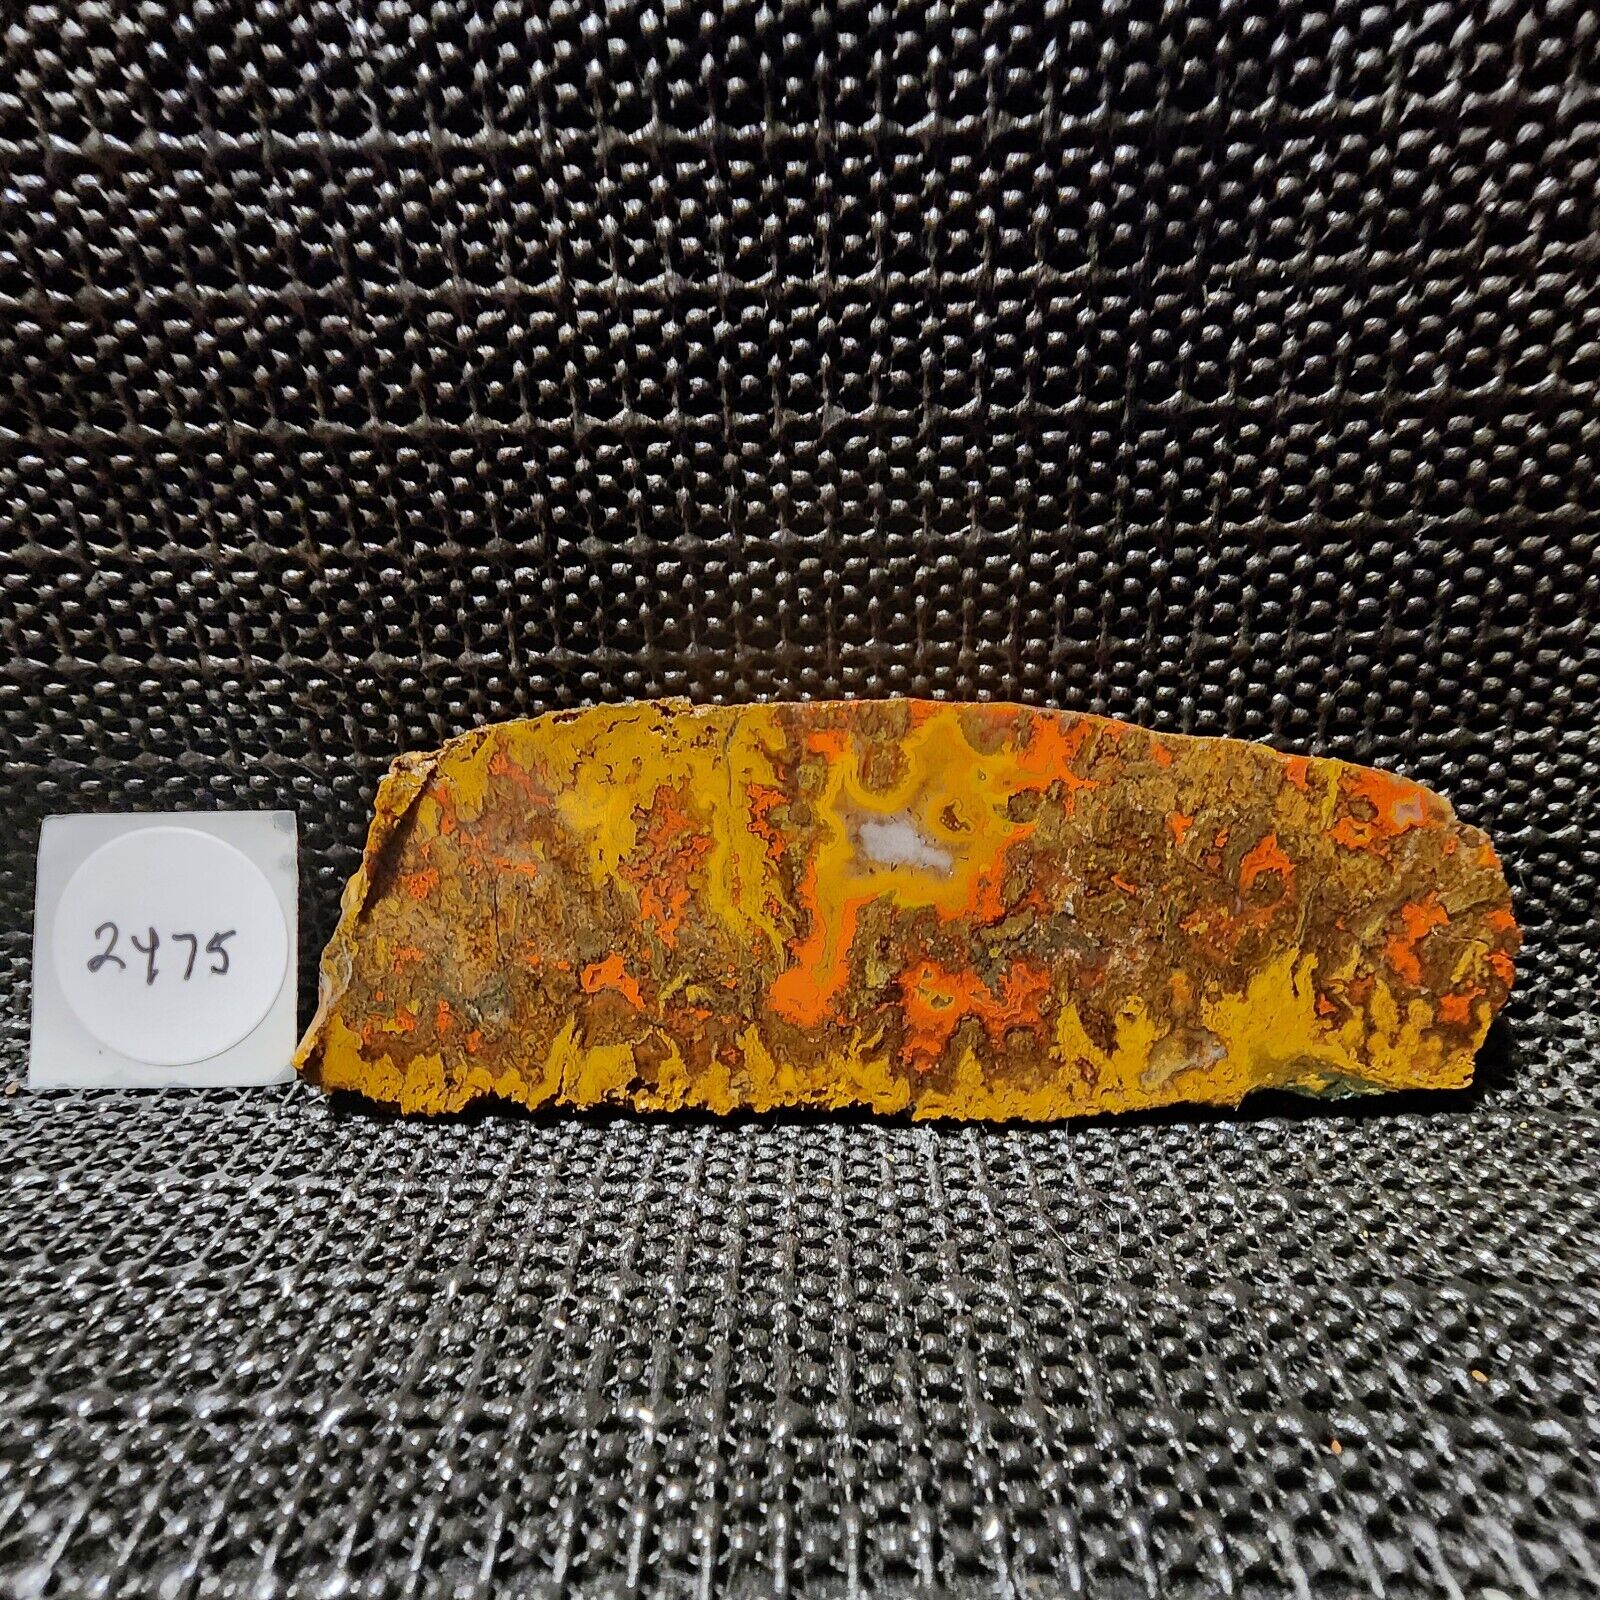 Gorgeous Moroccan Seam Agate Slab, Cab/Collect, Incredible Fiery Colors/Design